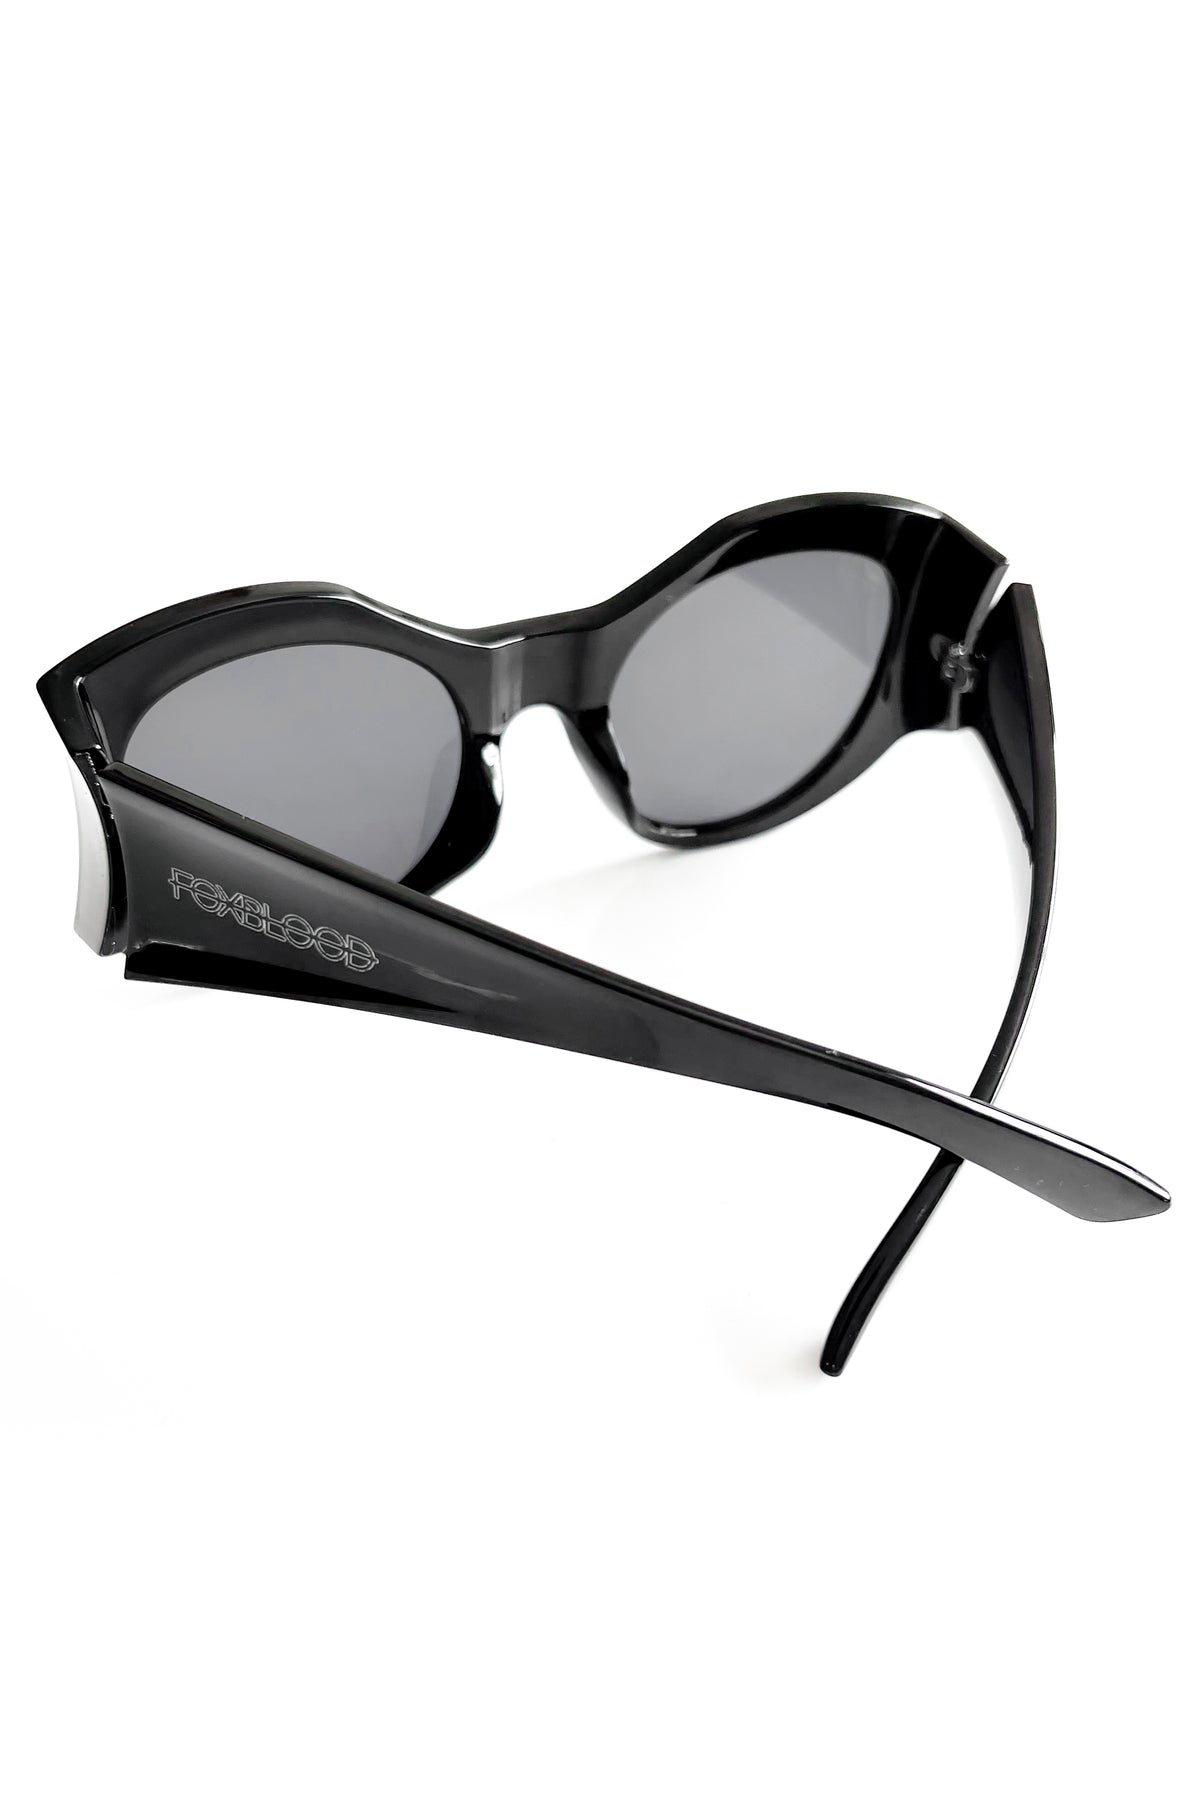 oversized black sunglasses with side indents and foxblood in white on the arm